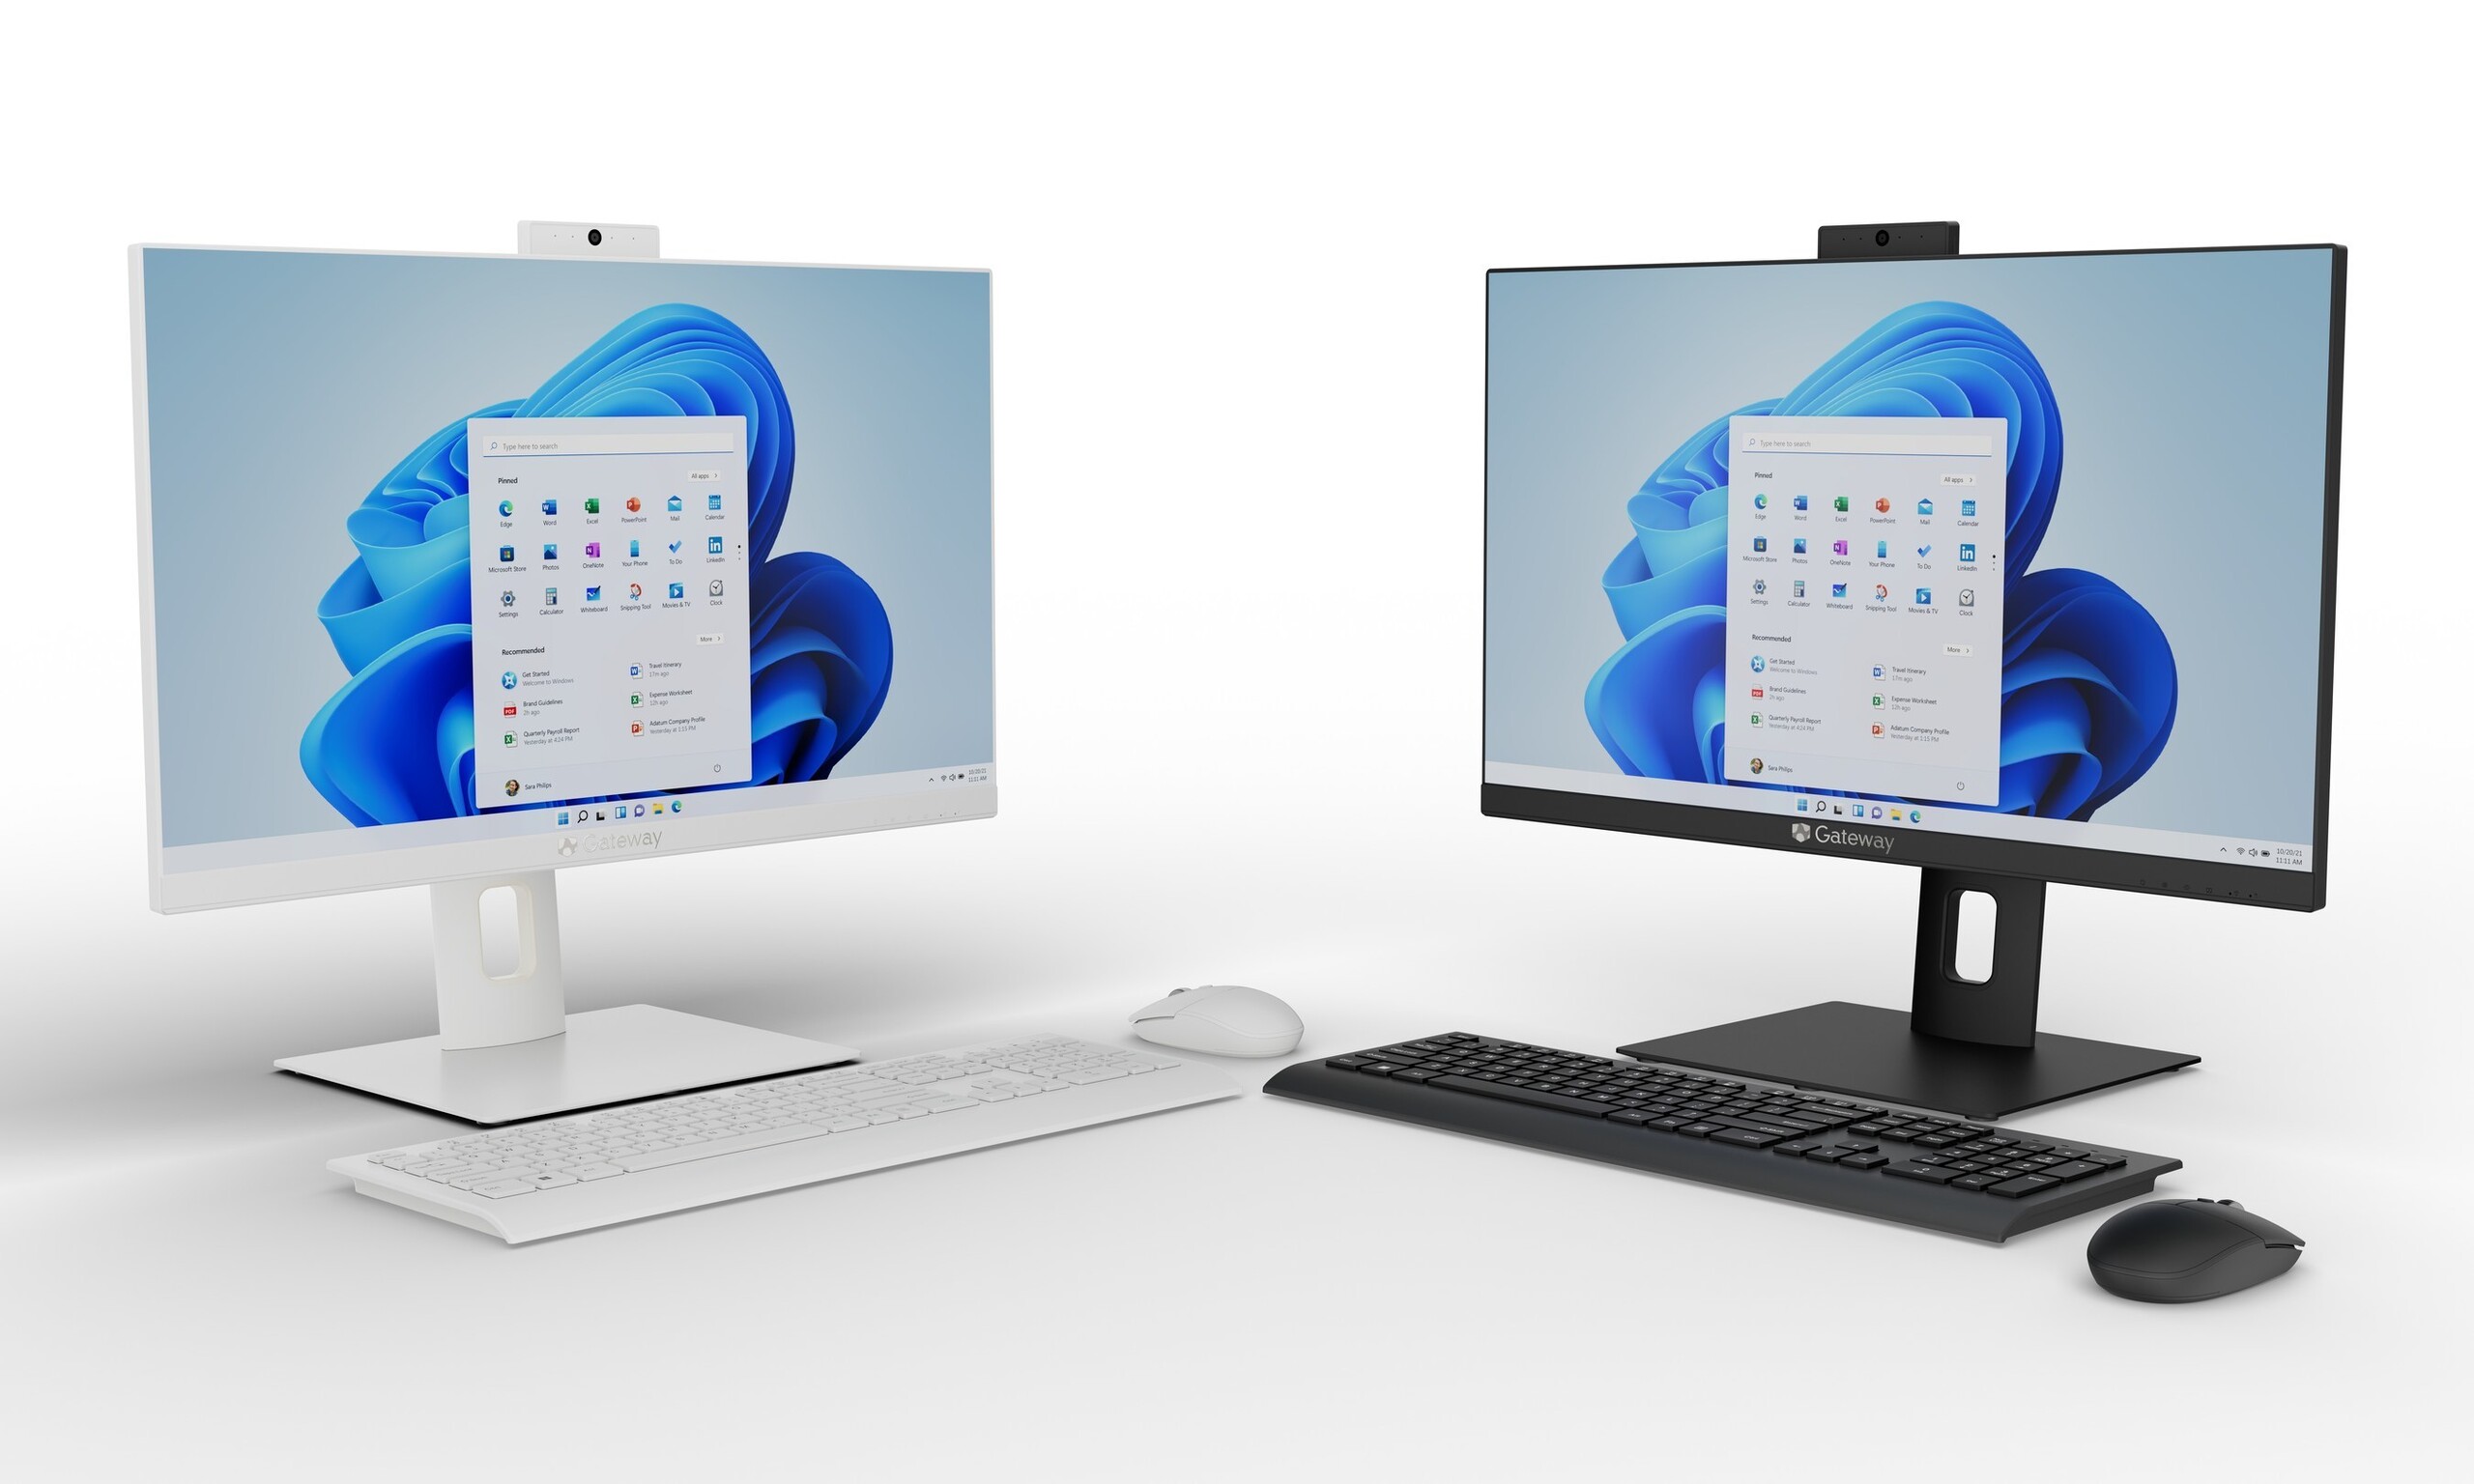 Gateway releases a new, affordable all-in-one PC through Walmart -   News